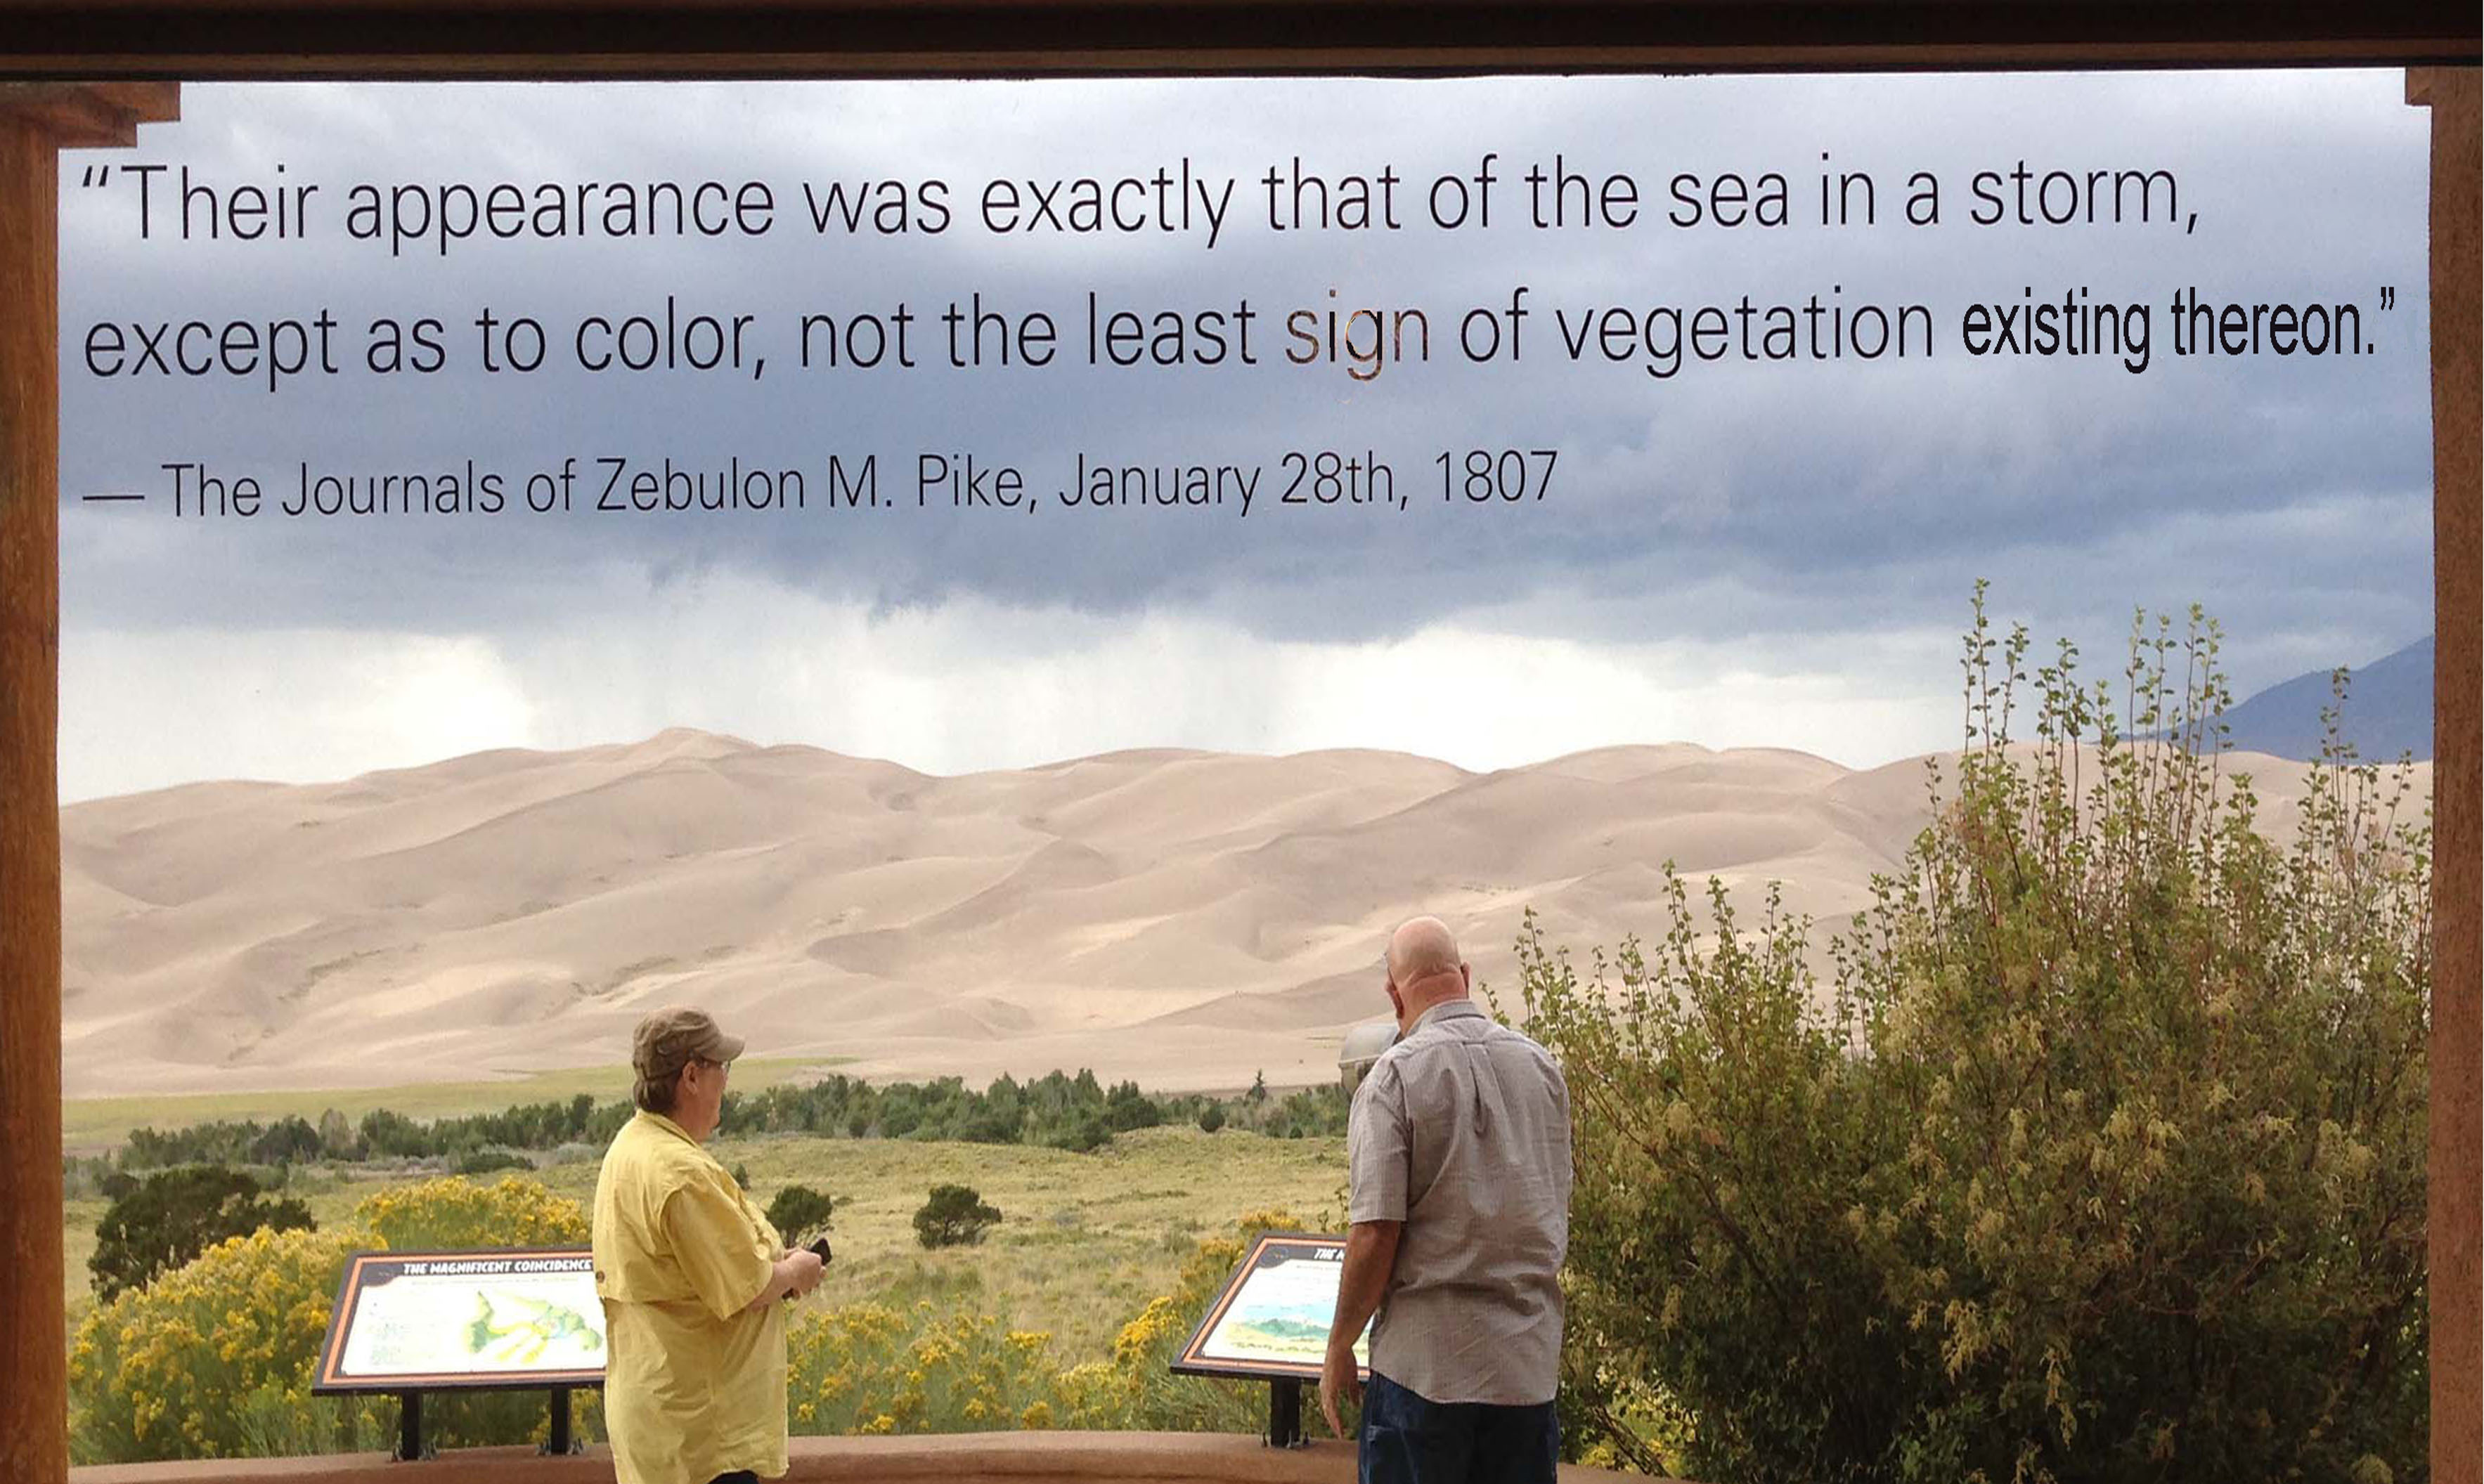 Famous Pike quote on window in the Great Sand Dunes National Park Visitor Center, Mosca, CO